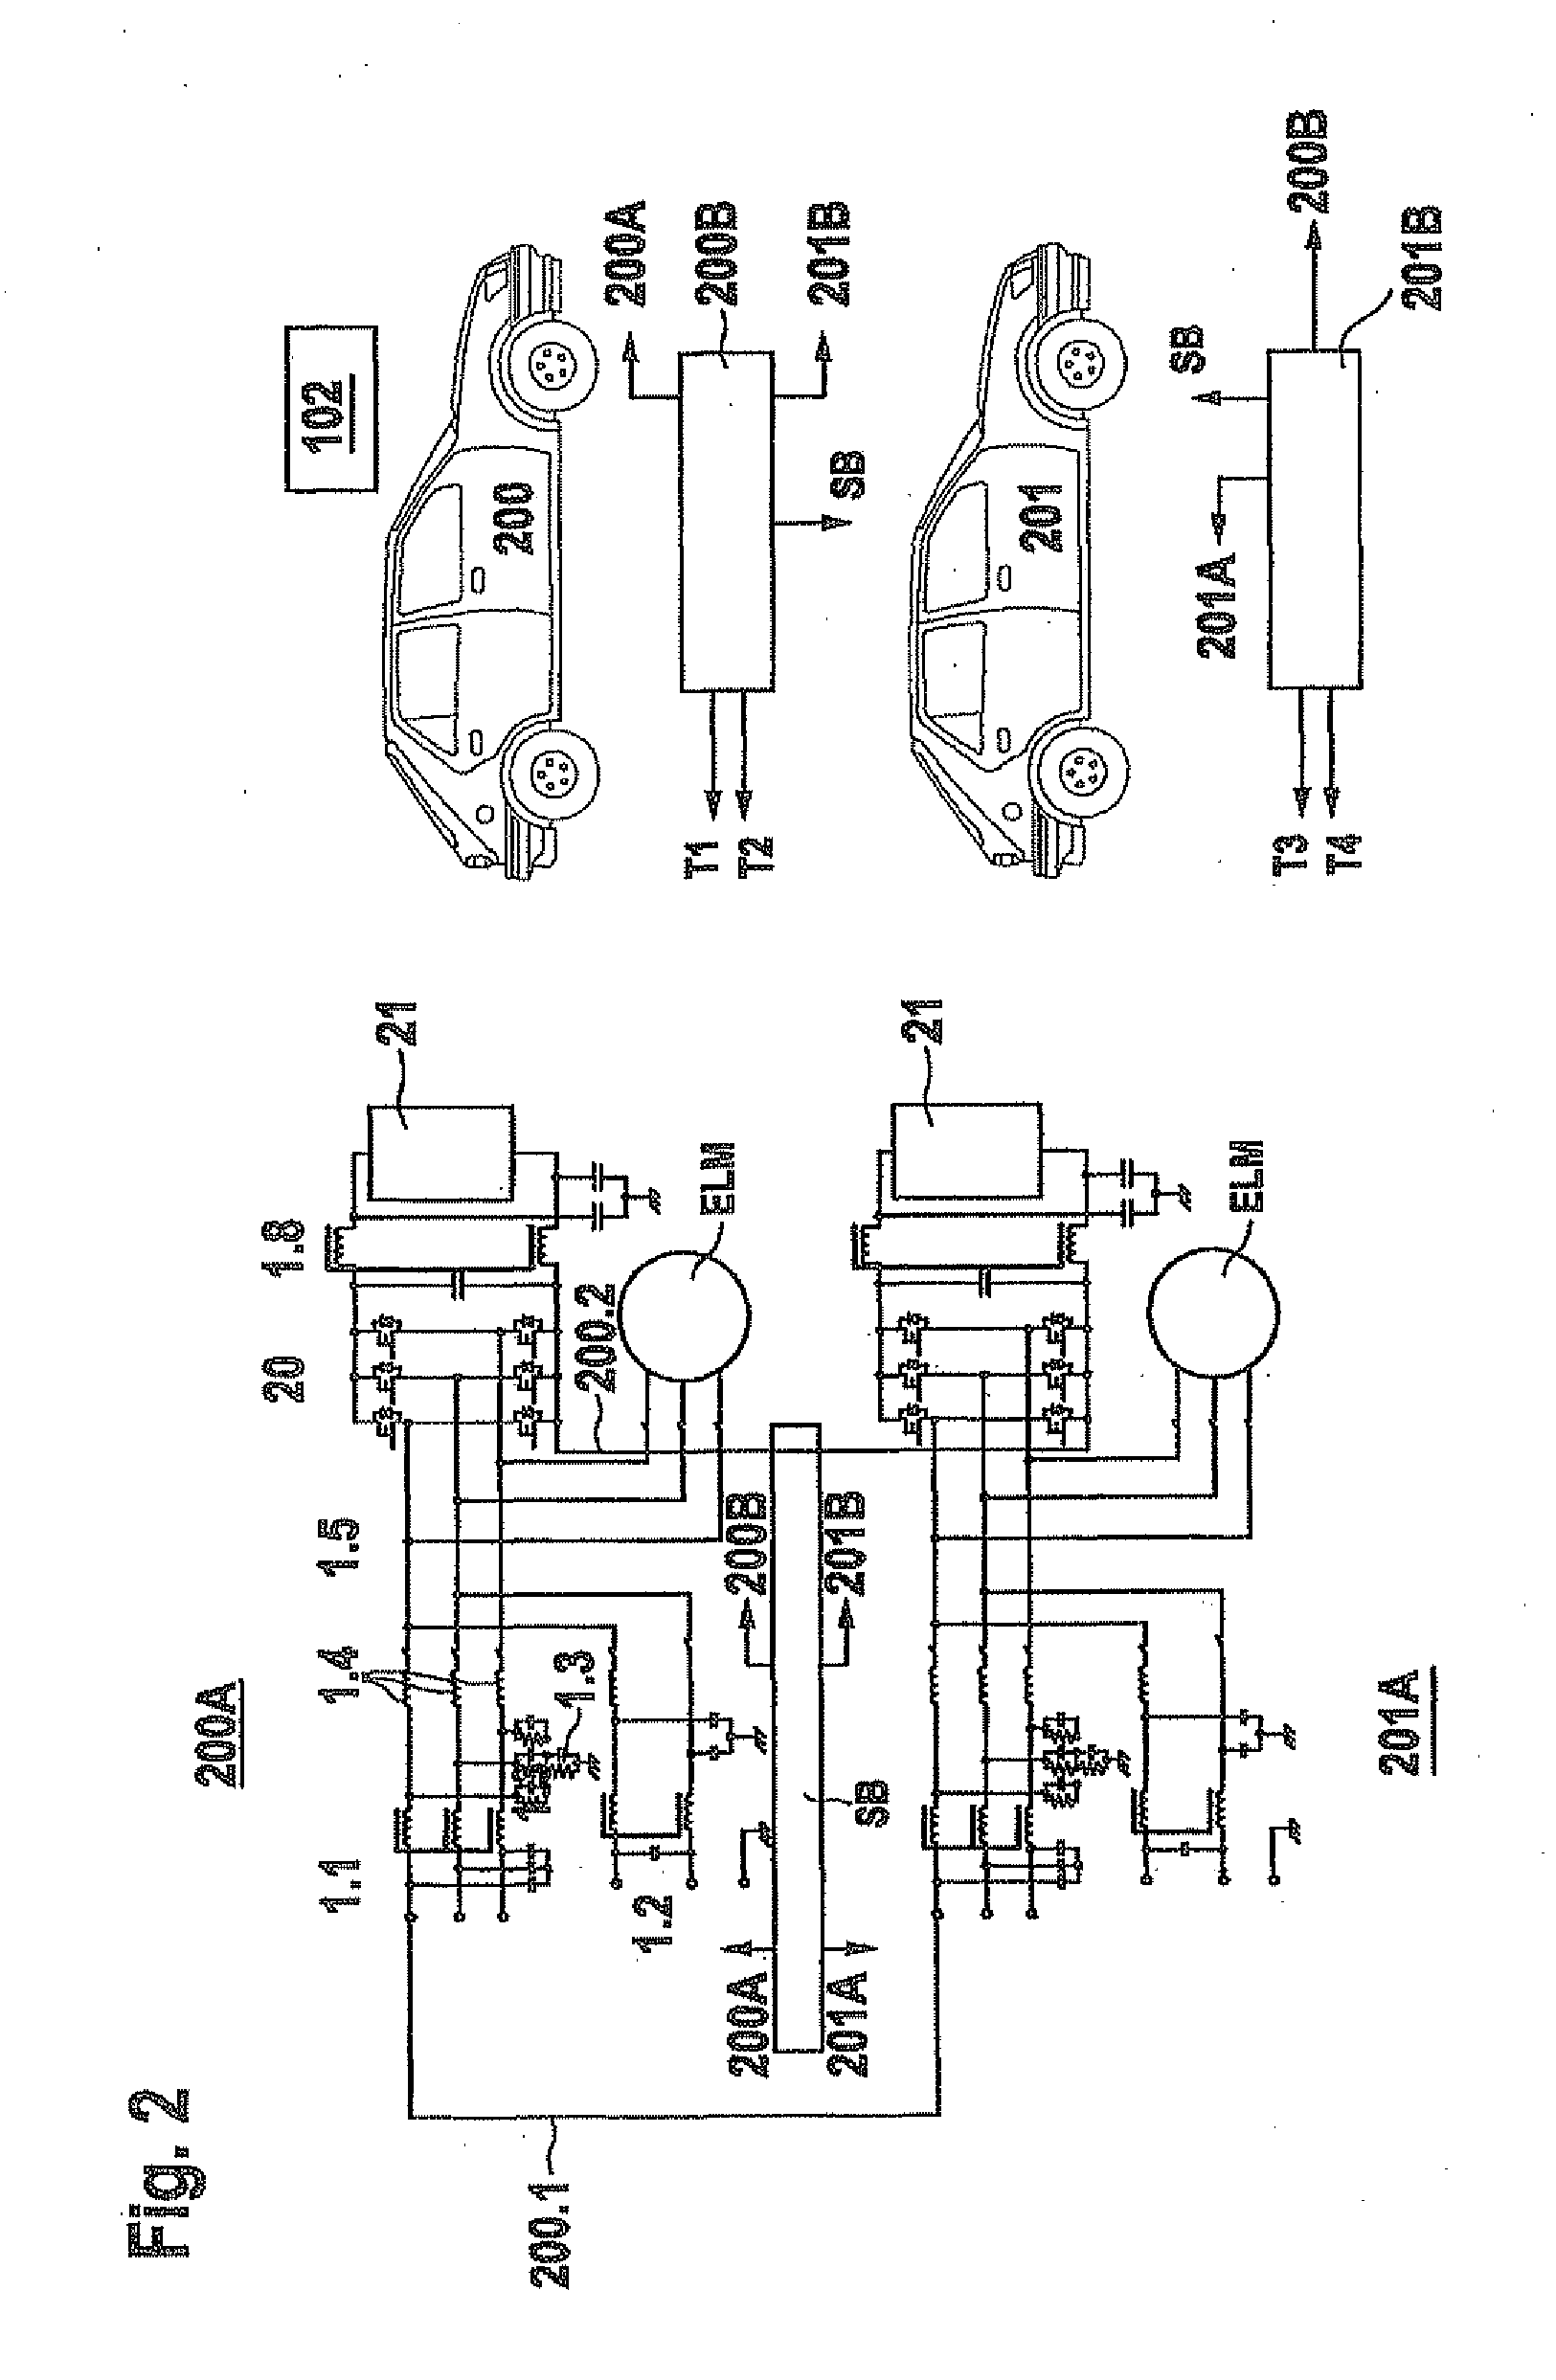 Jump-starting method and device for implementing the method